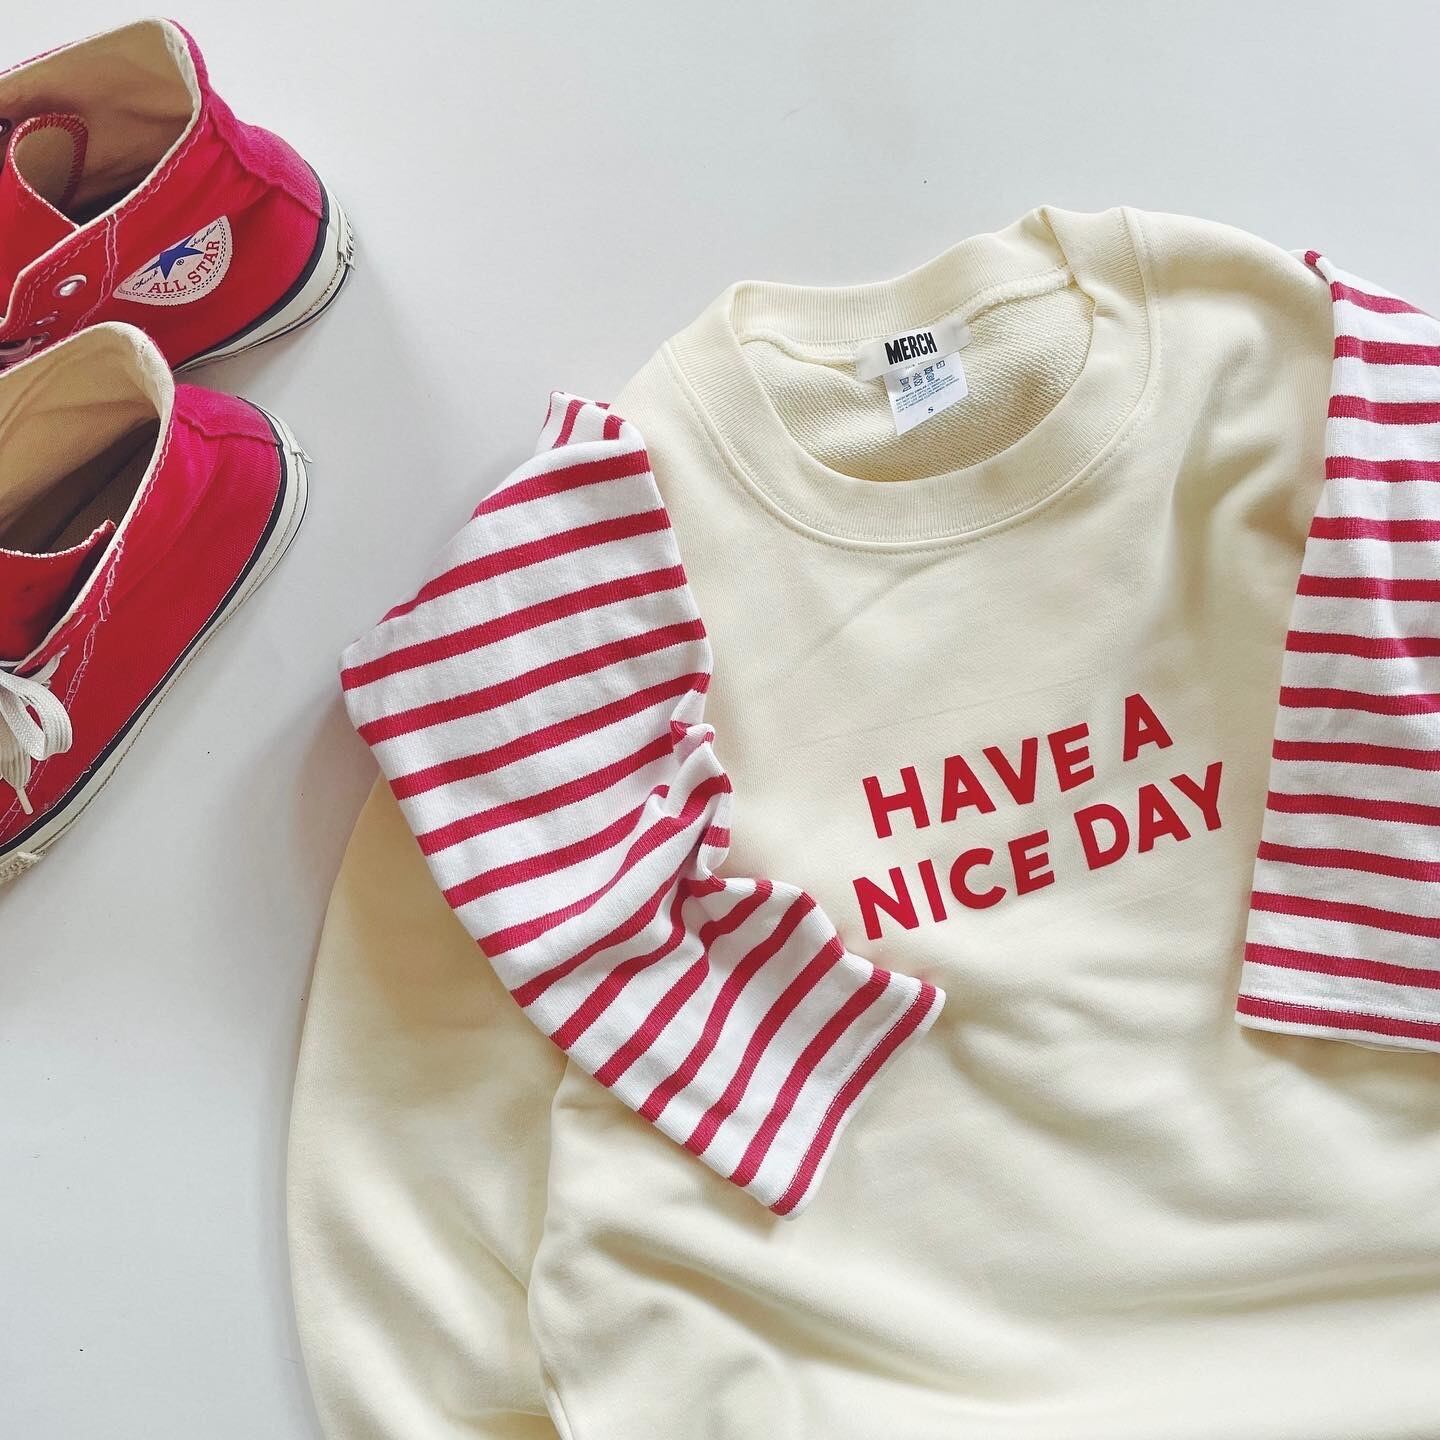 HAVE A NICE DAY Sweatshirts Adult